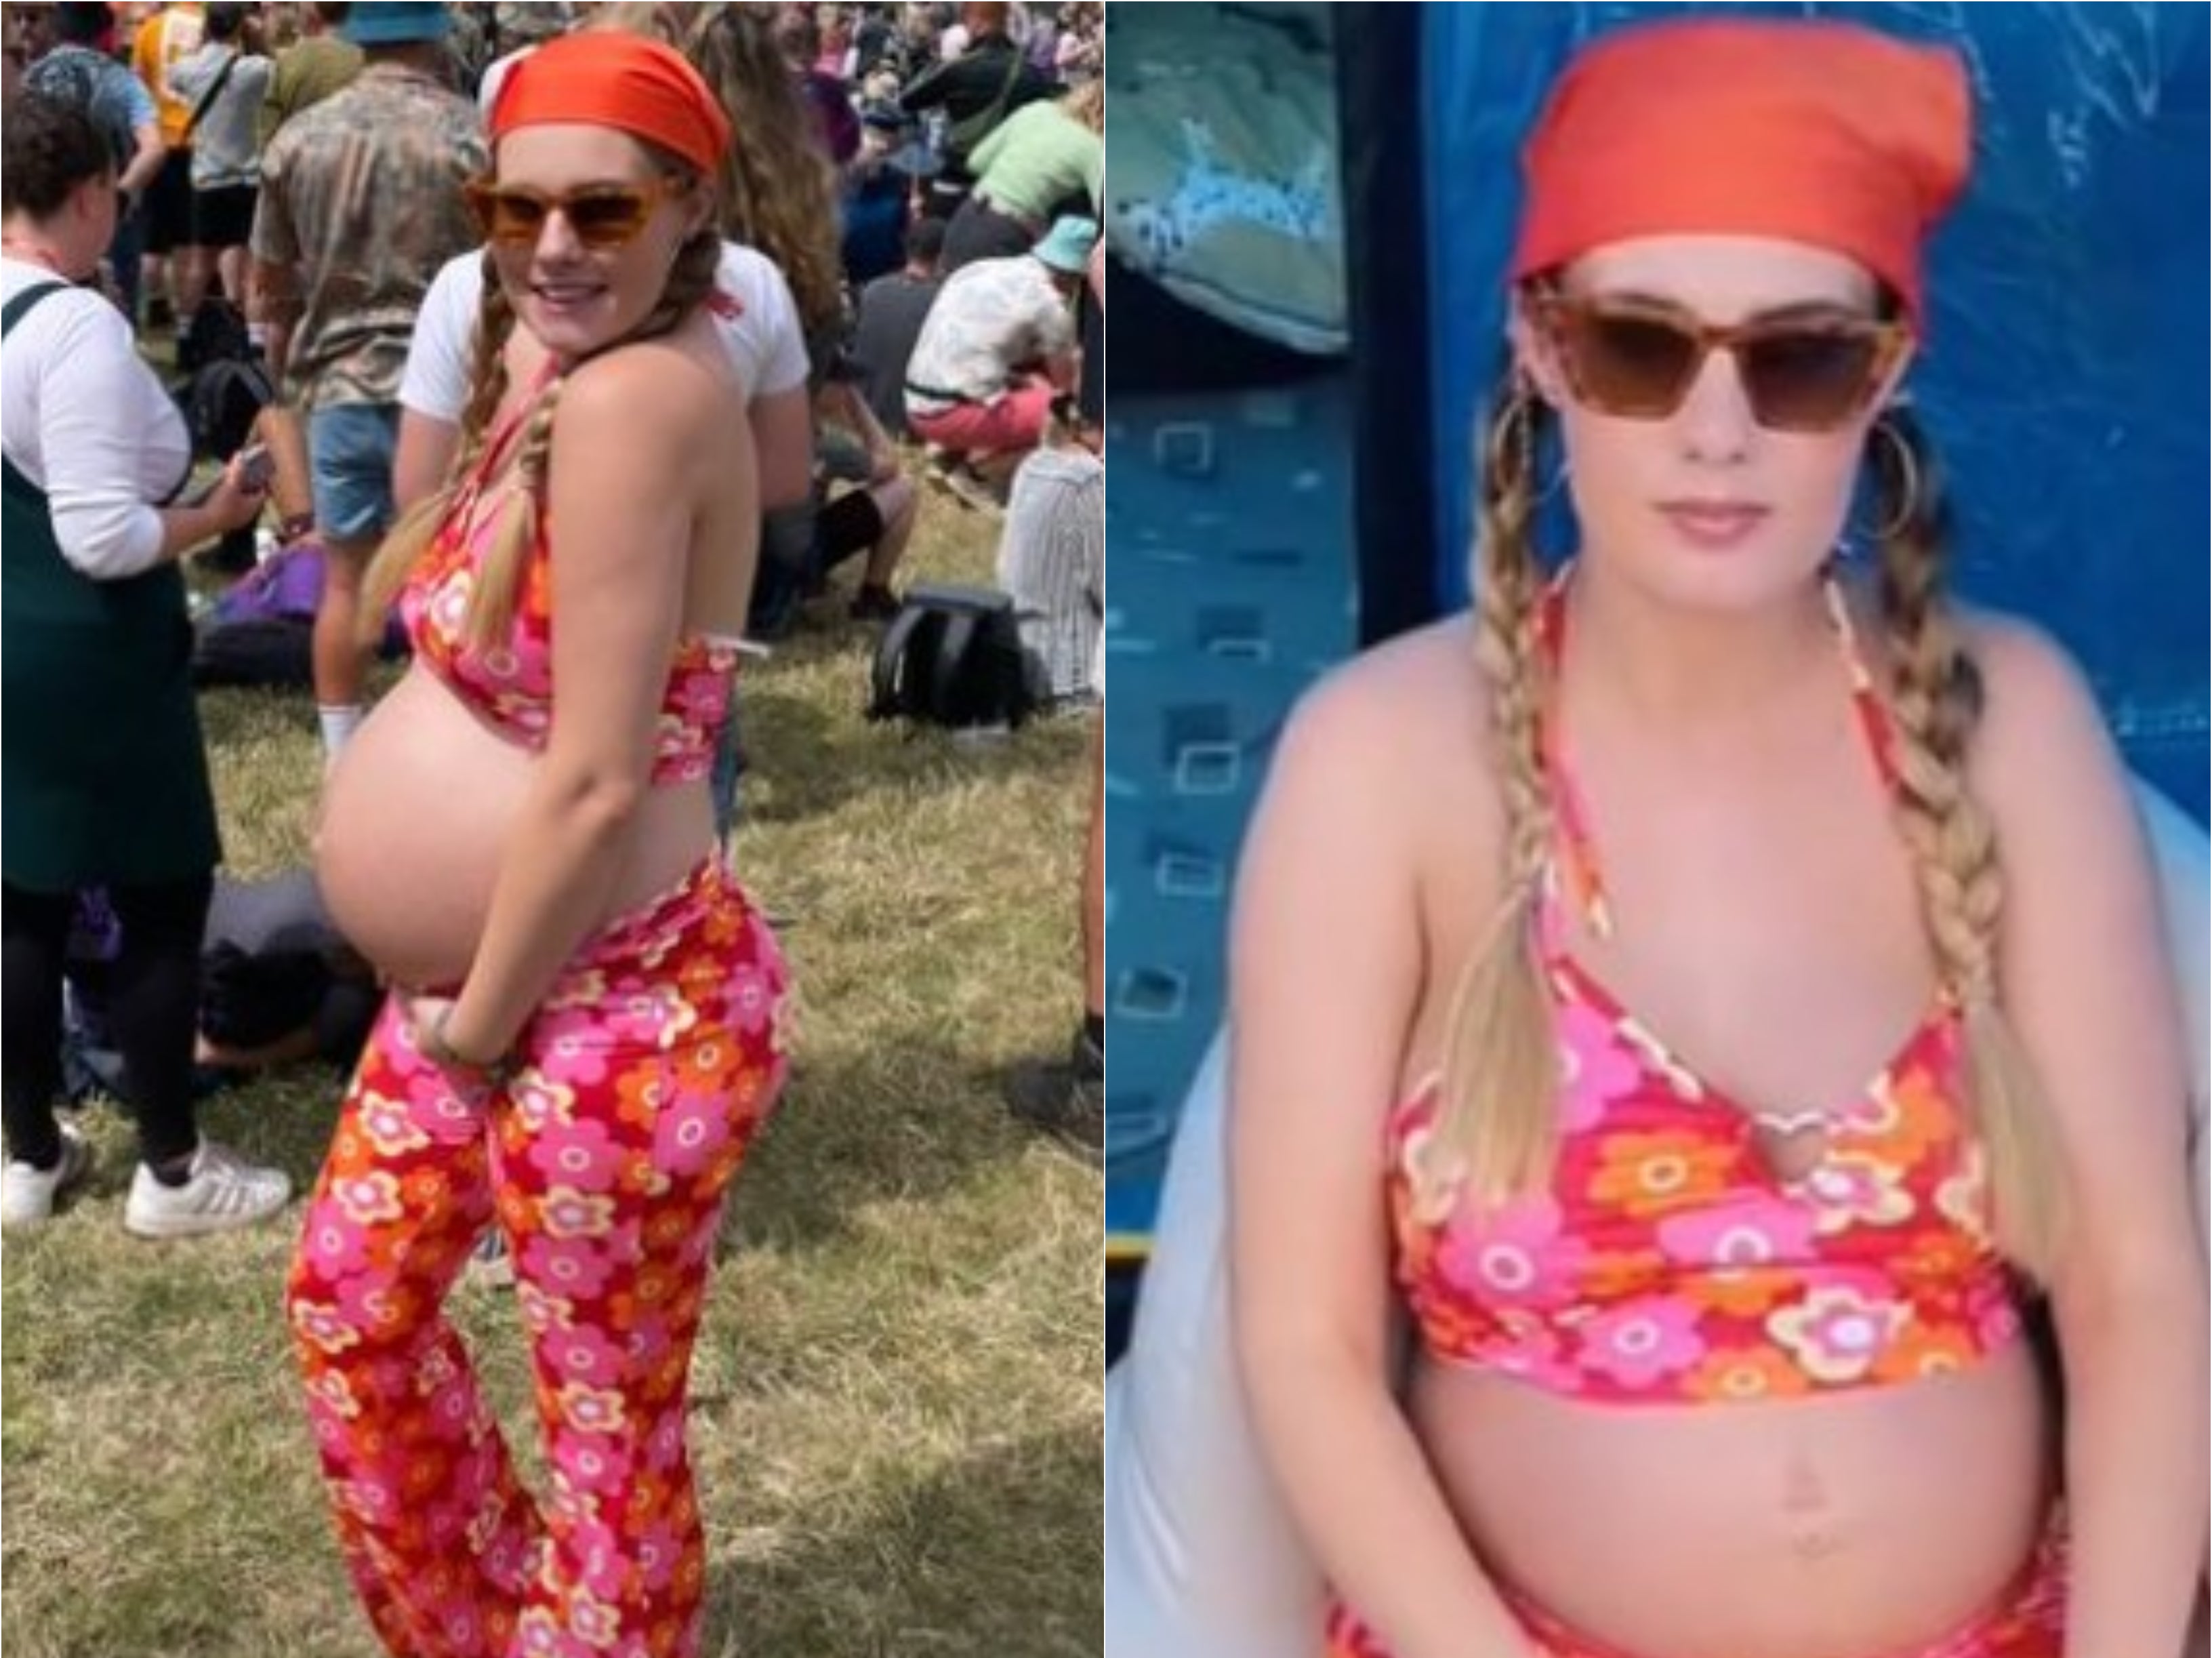 A mother-to-be has shared her experience at Glastonbury while 34 weeks pregnant